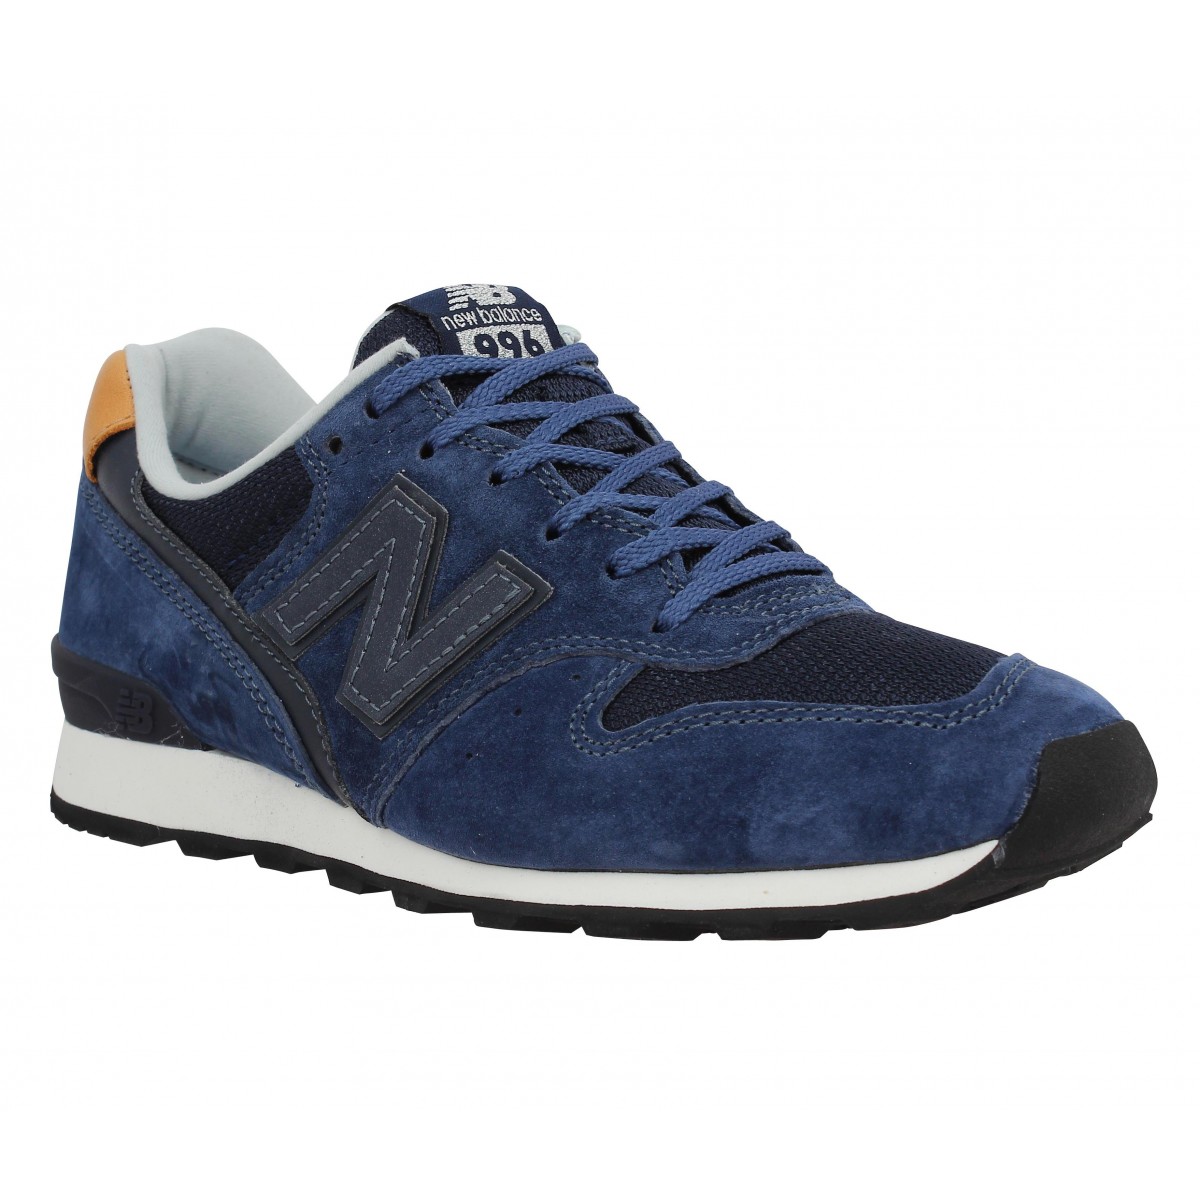 New balance 996 velours toile femme navy | Fanny chaussures